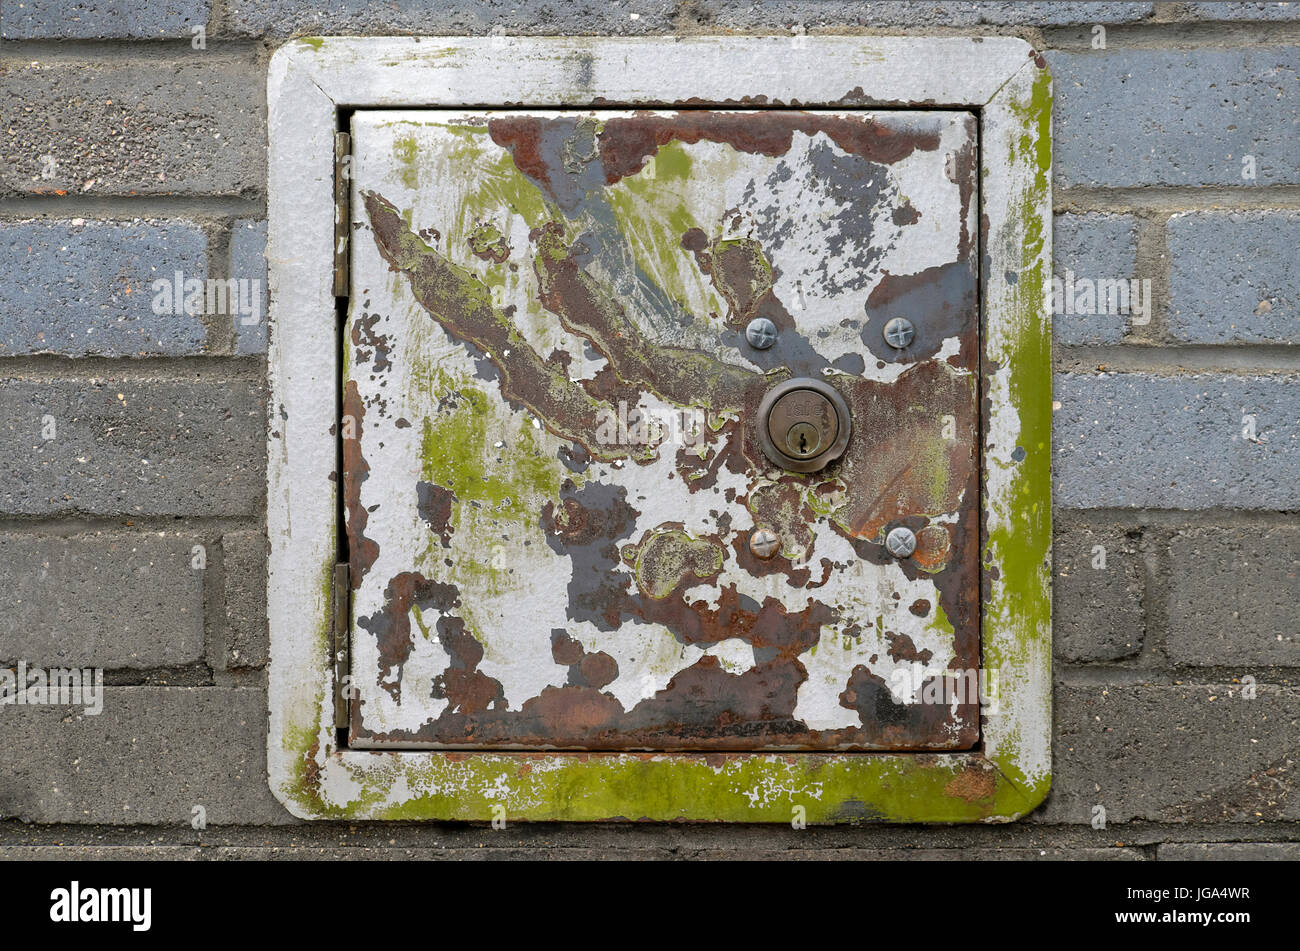 A green and gray paint splattered corroded metal safe box with a lock built into a brick wall in Shoreditch Tower Hamlets East London UK  KATHY DEWITT Stock Photo